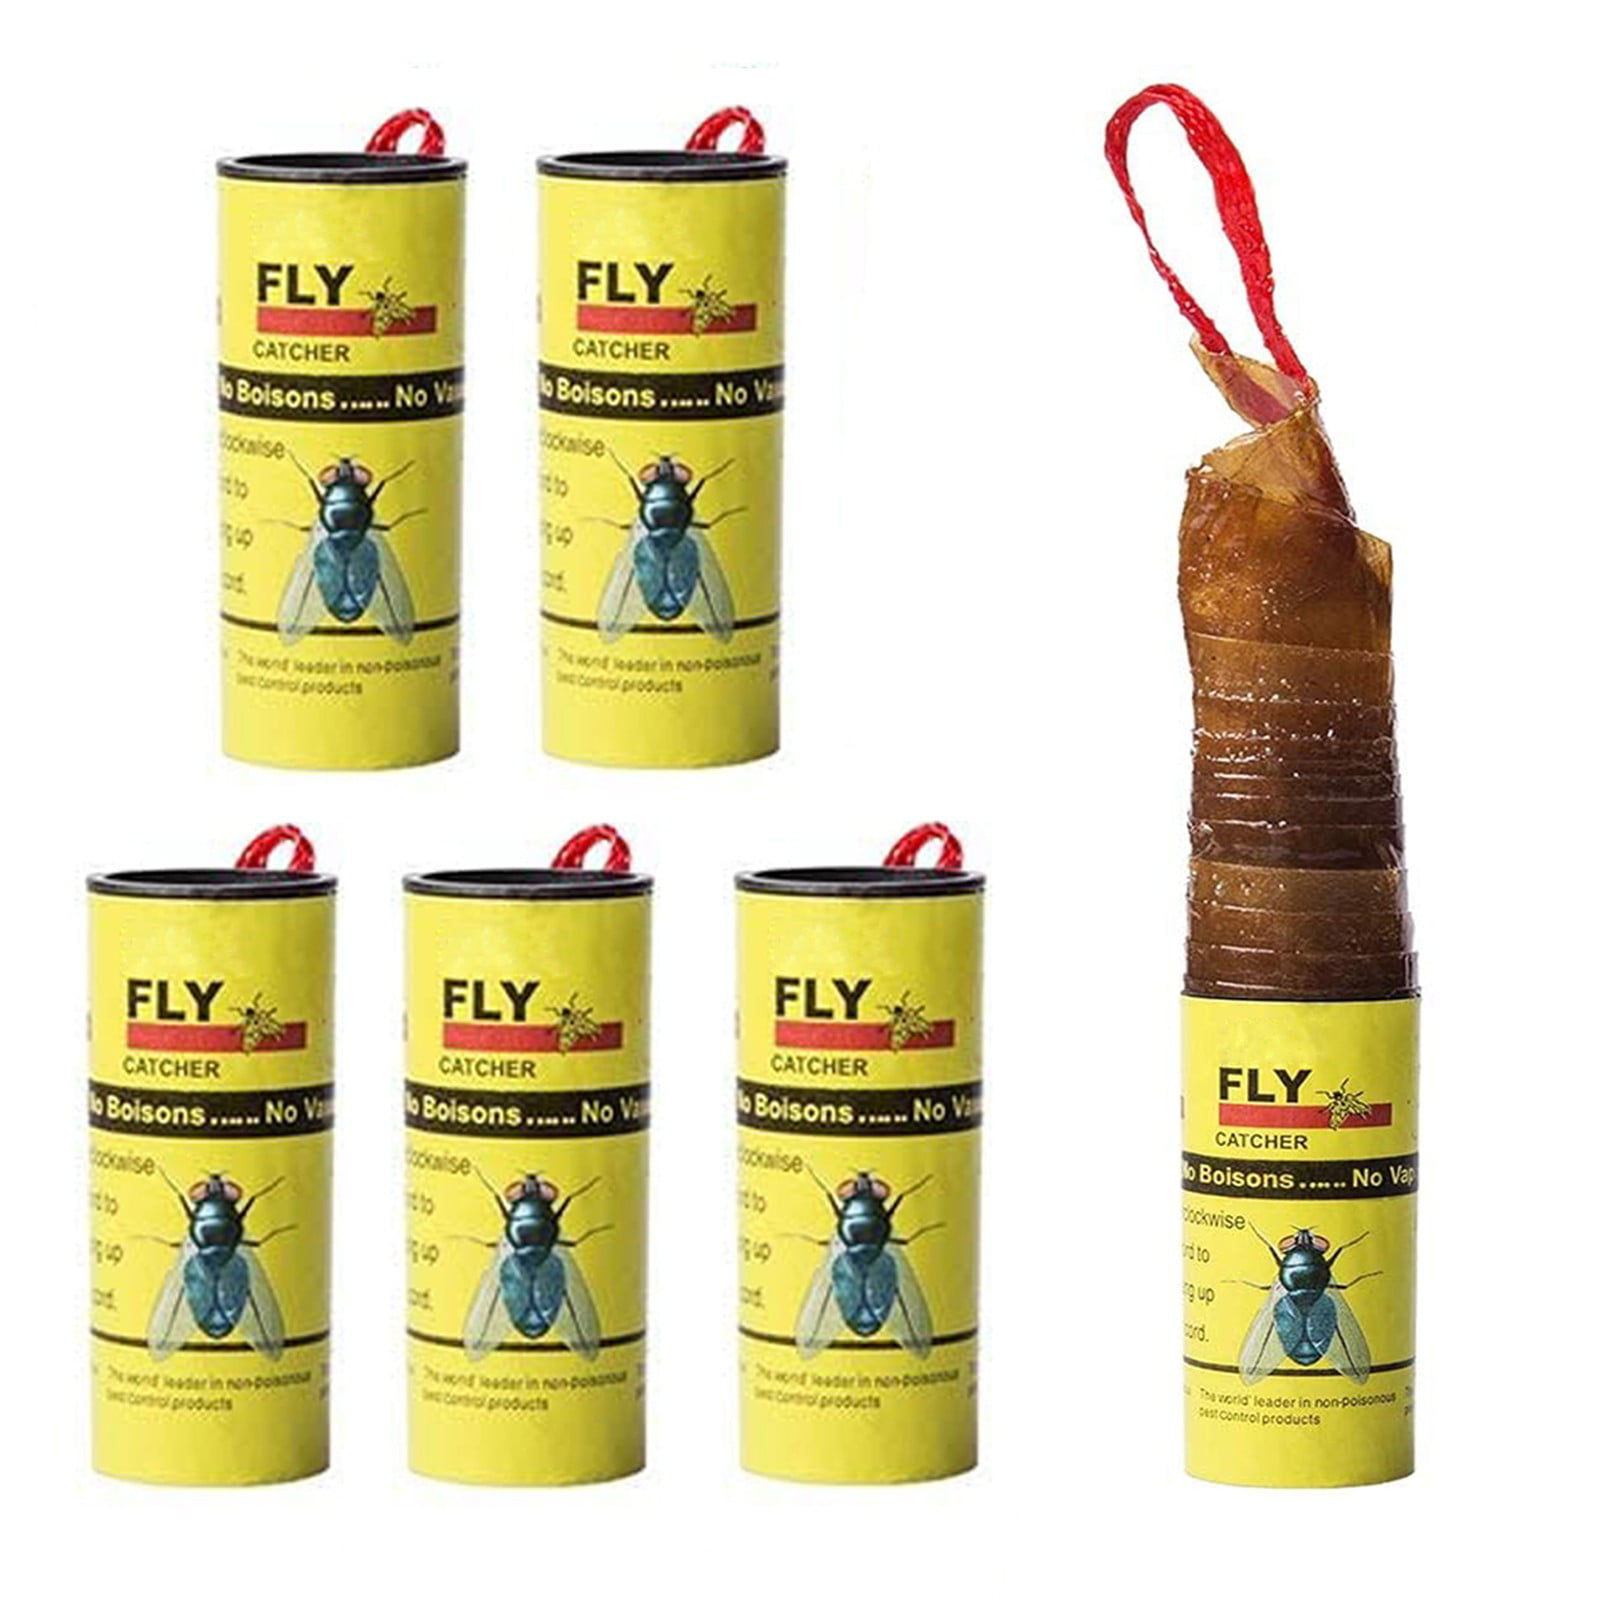 Sticky Roll Fly Tape 1000' Deluxe Kit w/Hardware. Coburn